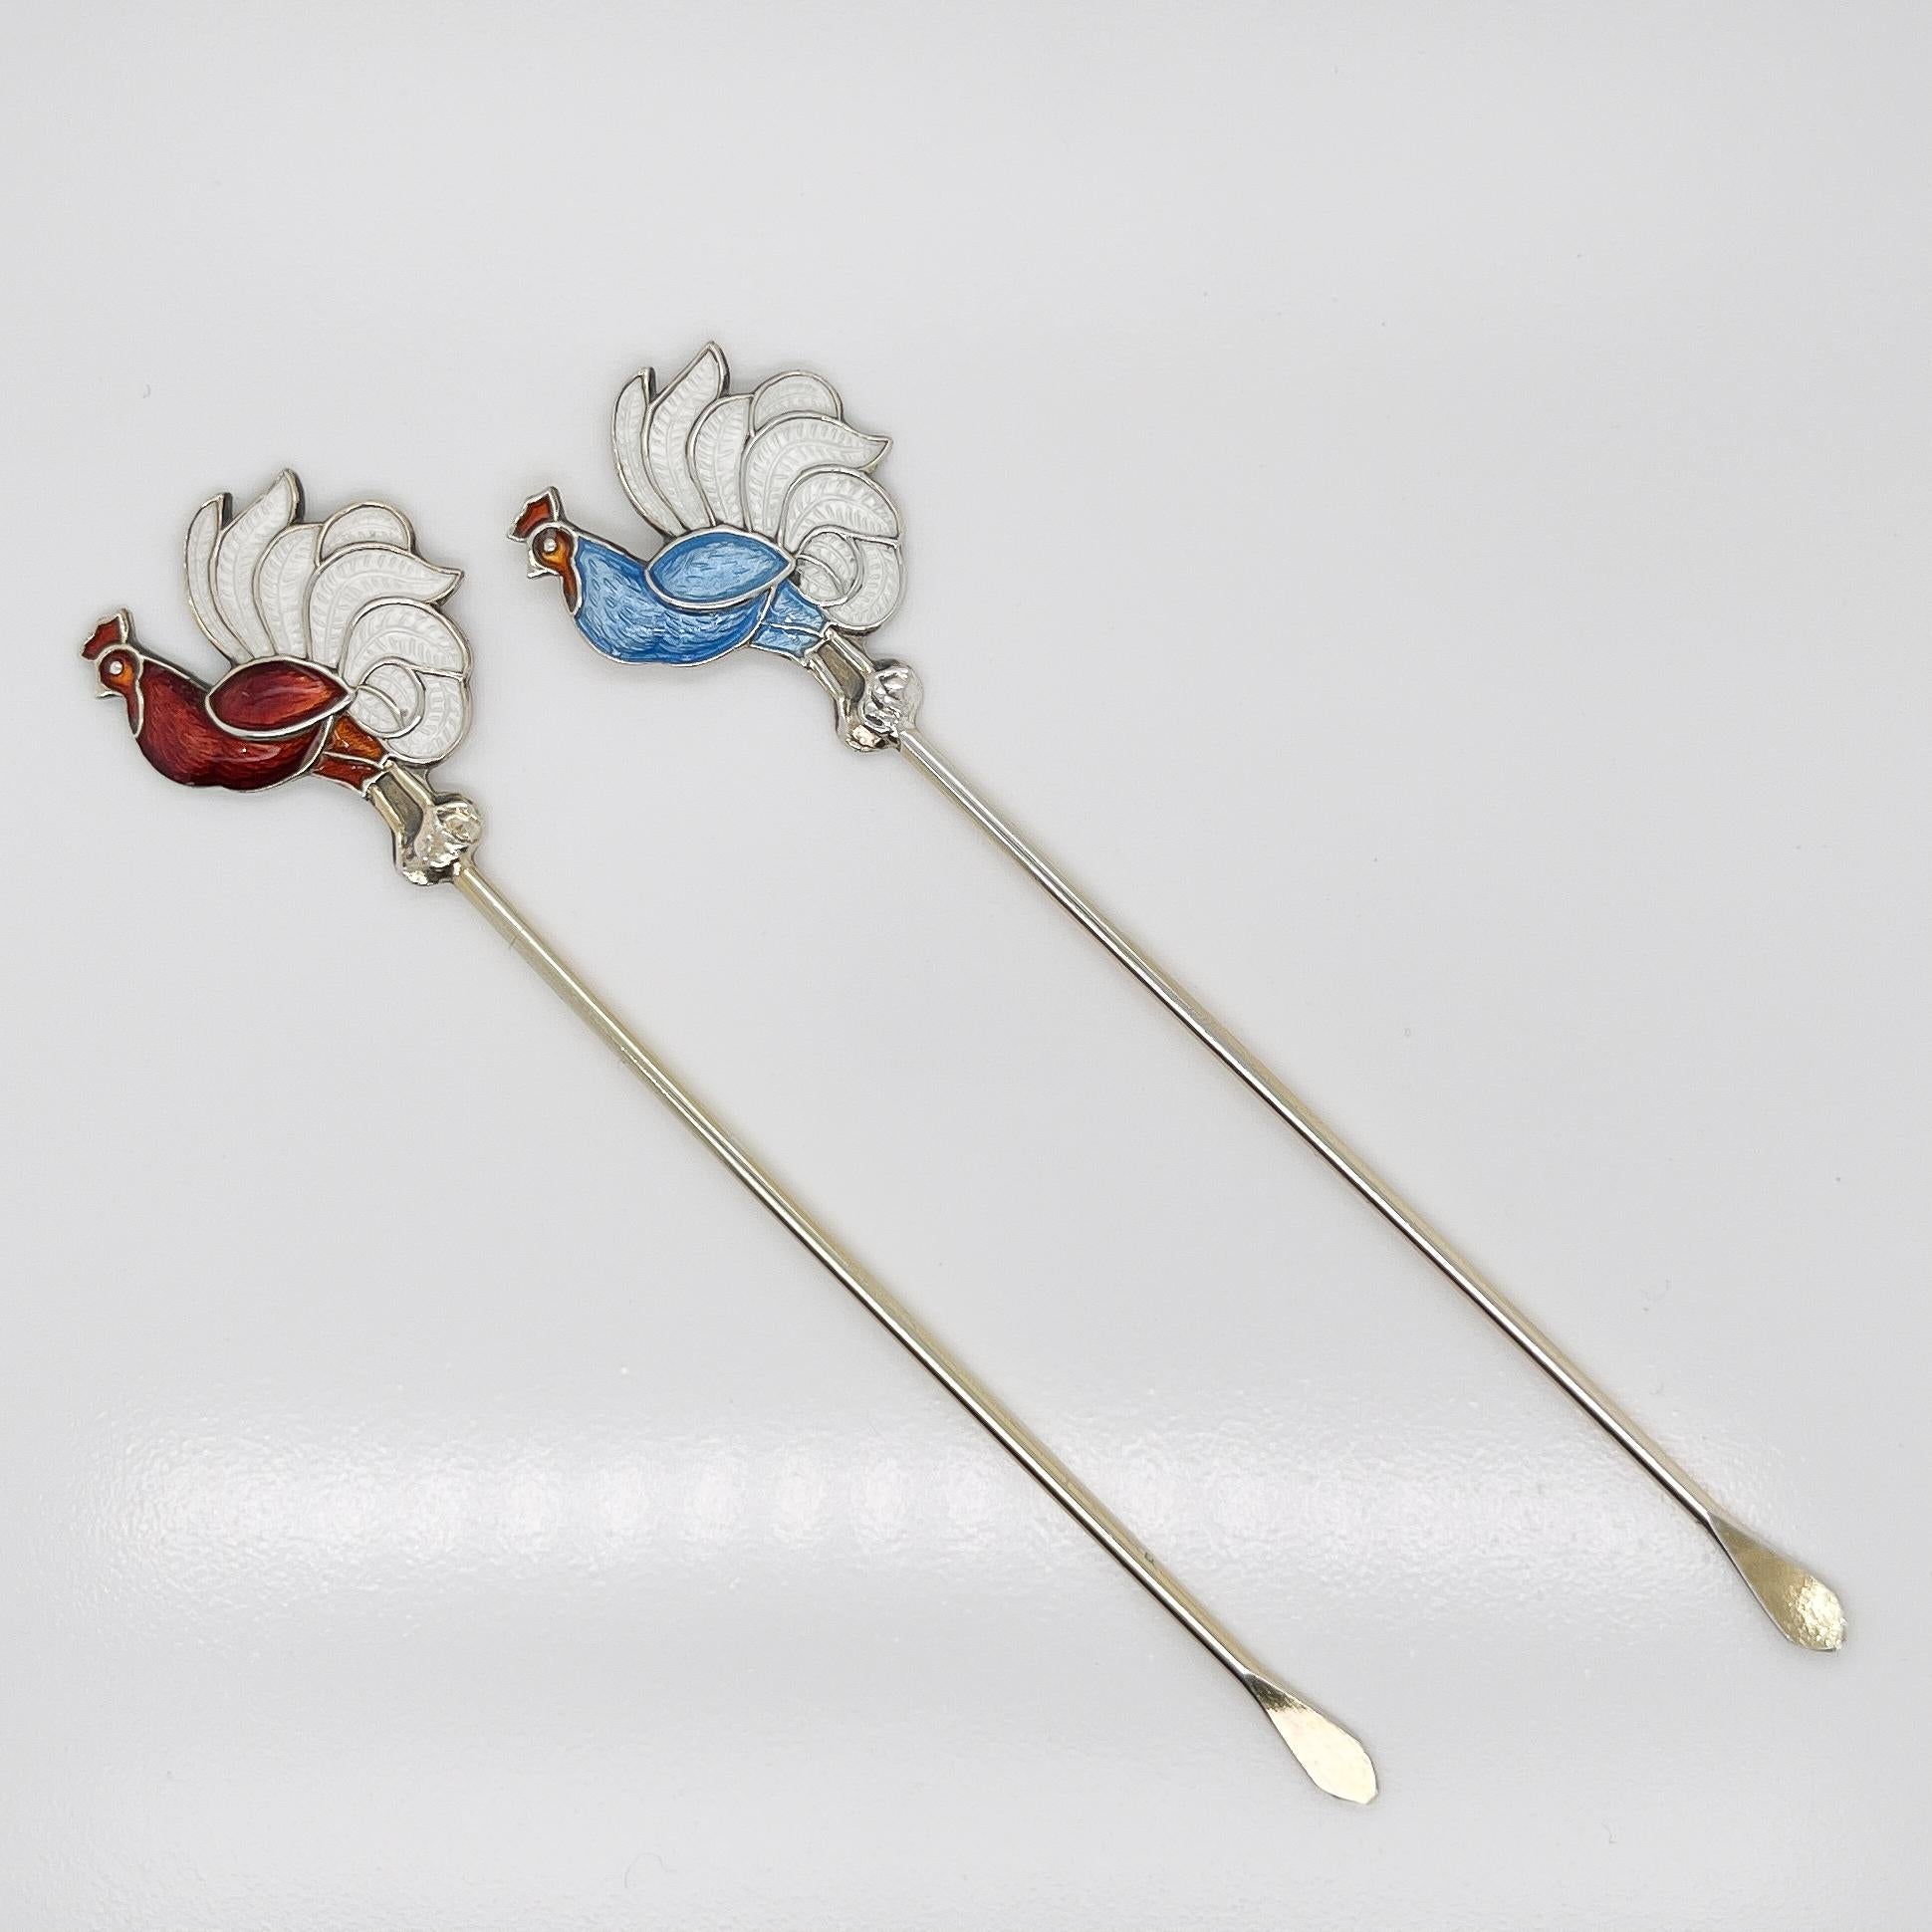 A fine pair of Norwegian Mid-century Modern cocktail picks.

By Bernard Meldahl.

In sterling silver with enamel and traces of gilding. 

Simply a great pair of cocktail picks!

Date:
Mid-20th Century

Overall Condition:
They are in overall good,